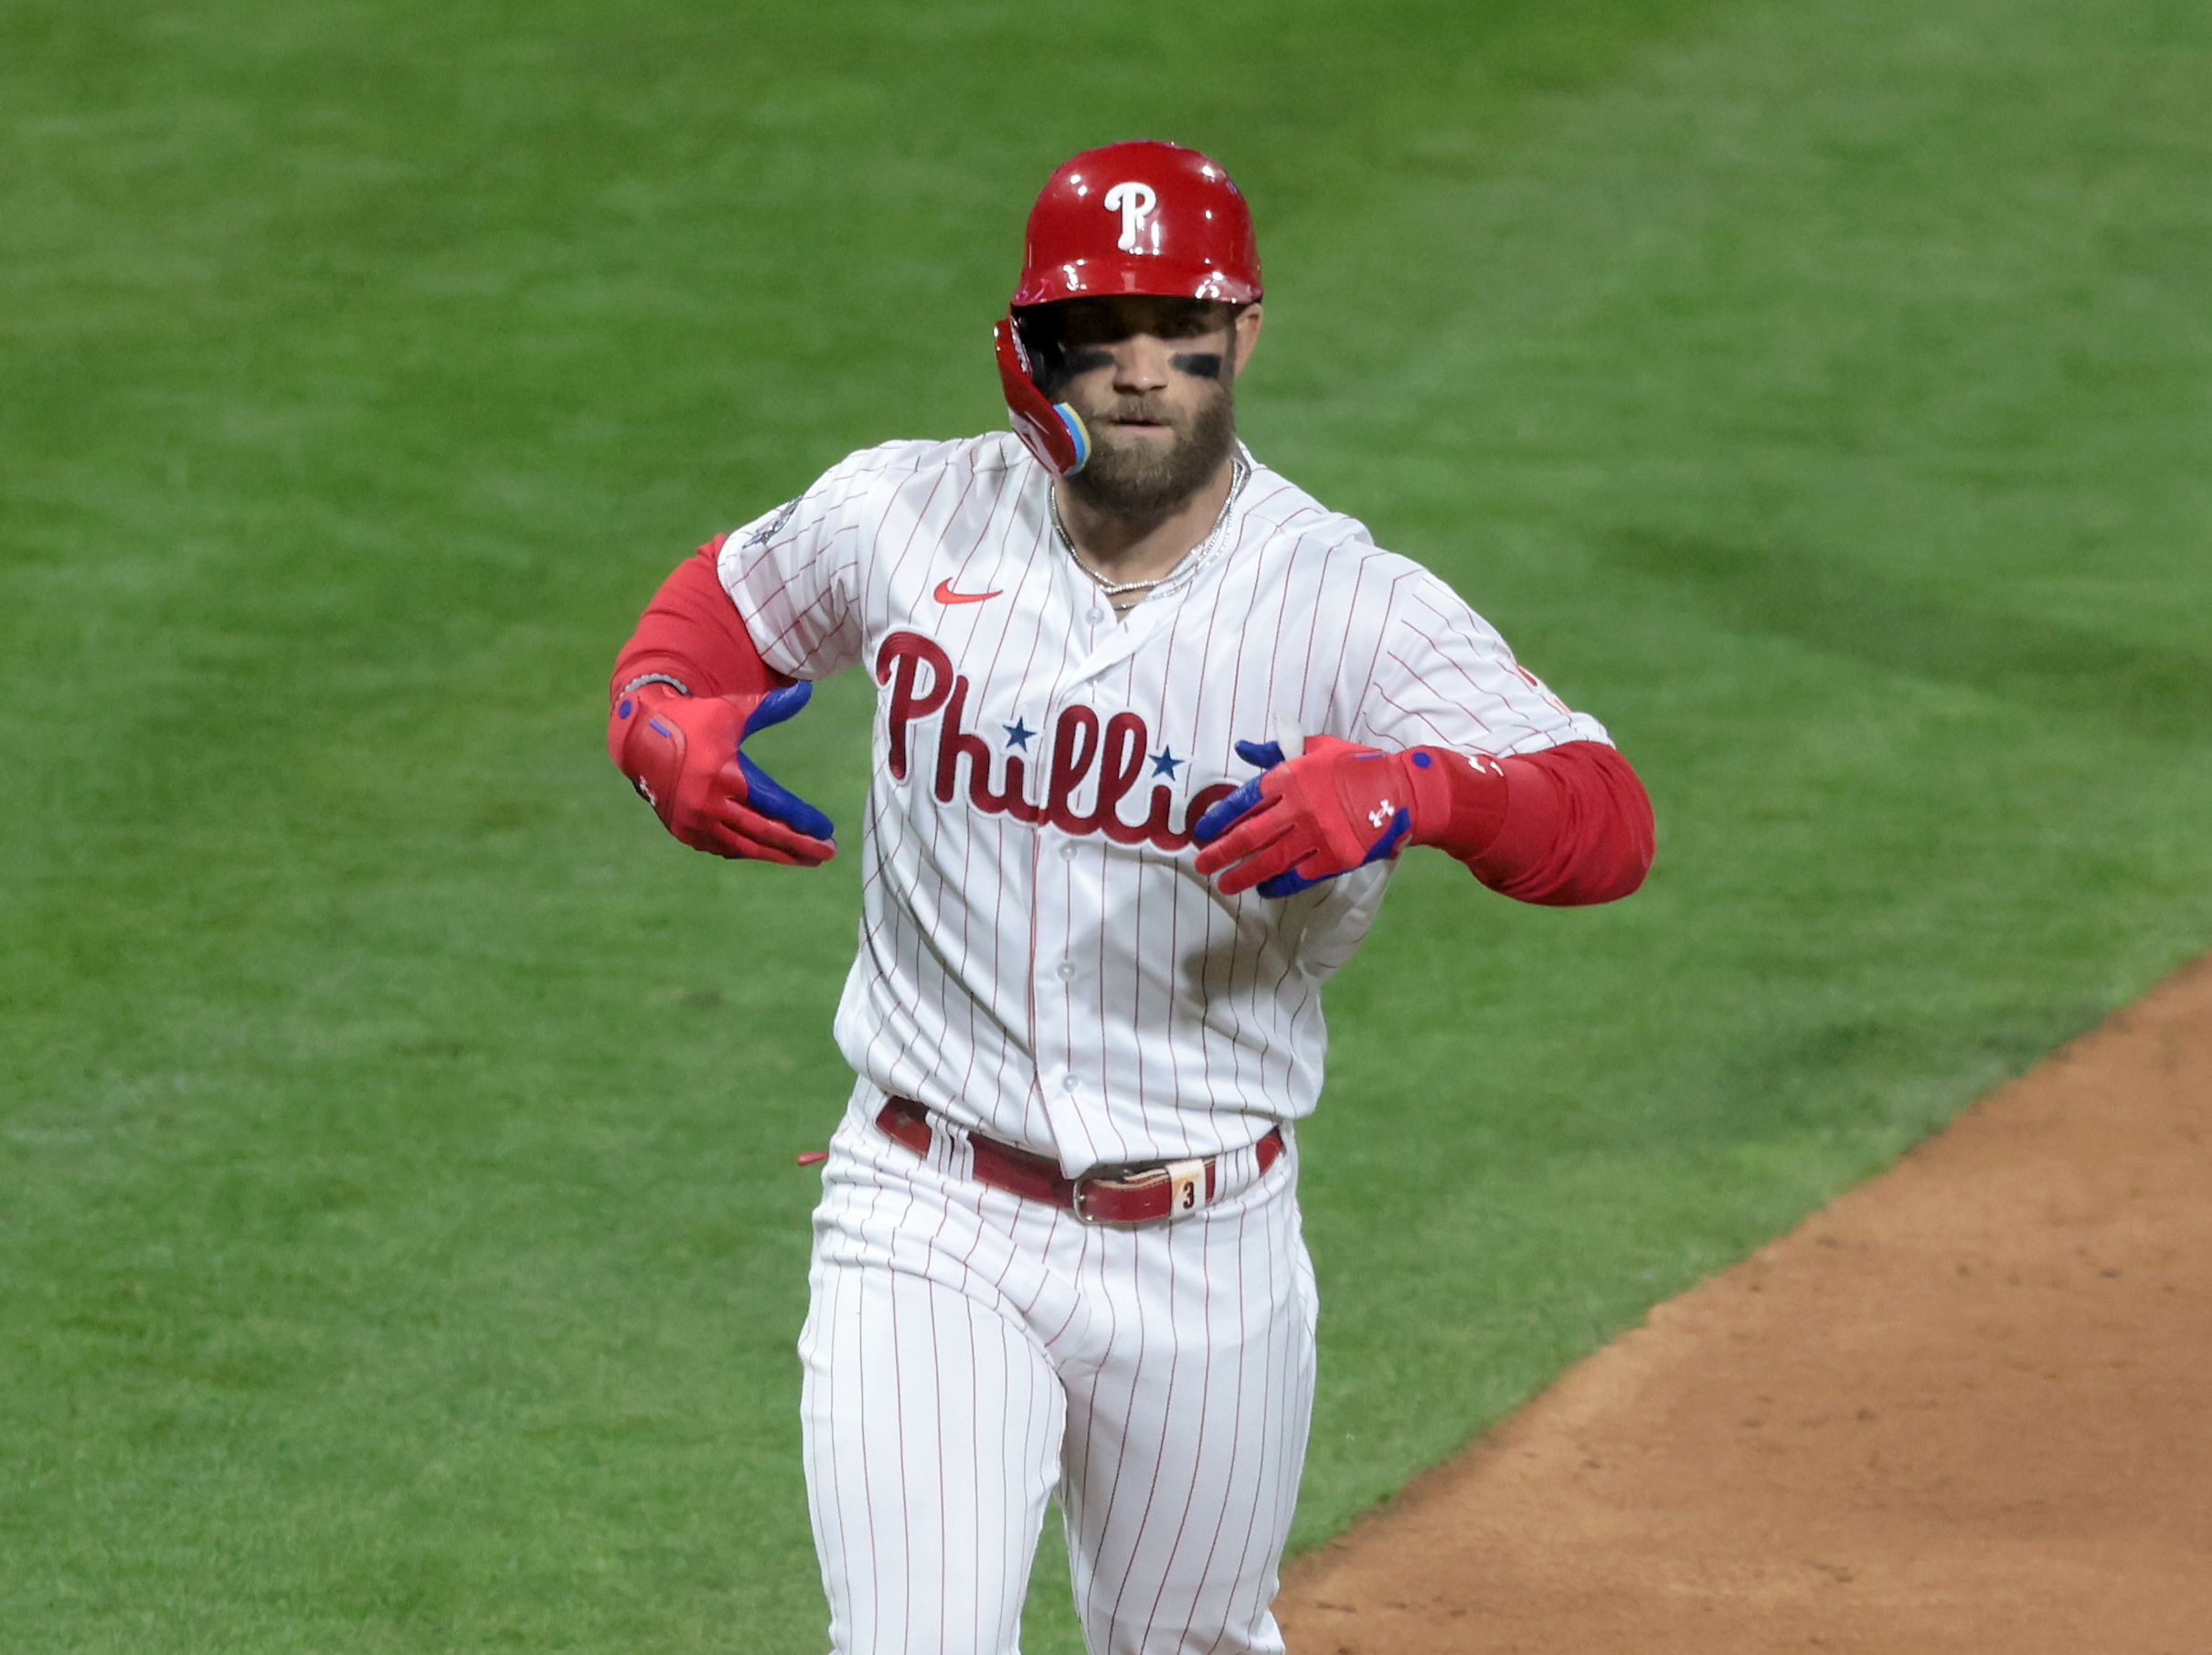 Bryce Harper (3) of the Philadelphia Phillies celebrates his two-run home run in the first inning vs. the Houston Astros during Game 3 of the World Series at Citizens Bank Park, Tuesday, Nov. 1 2022.